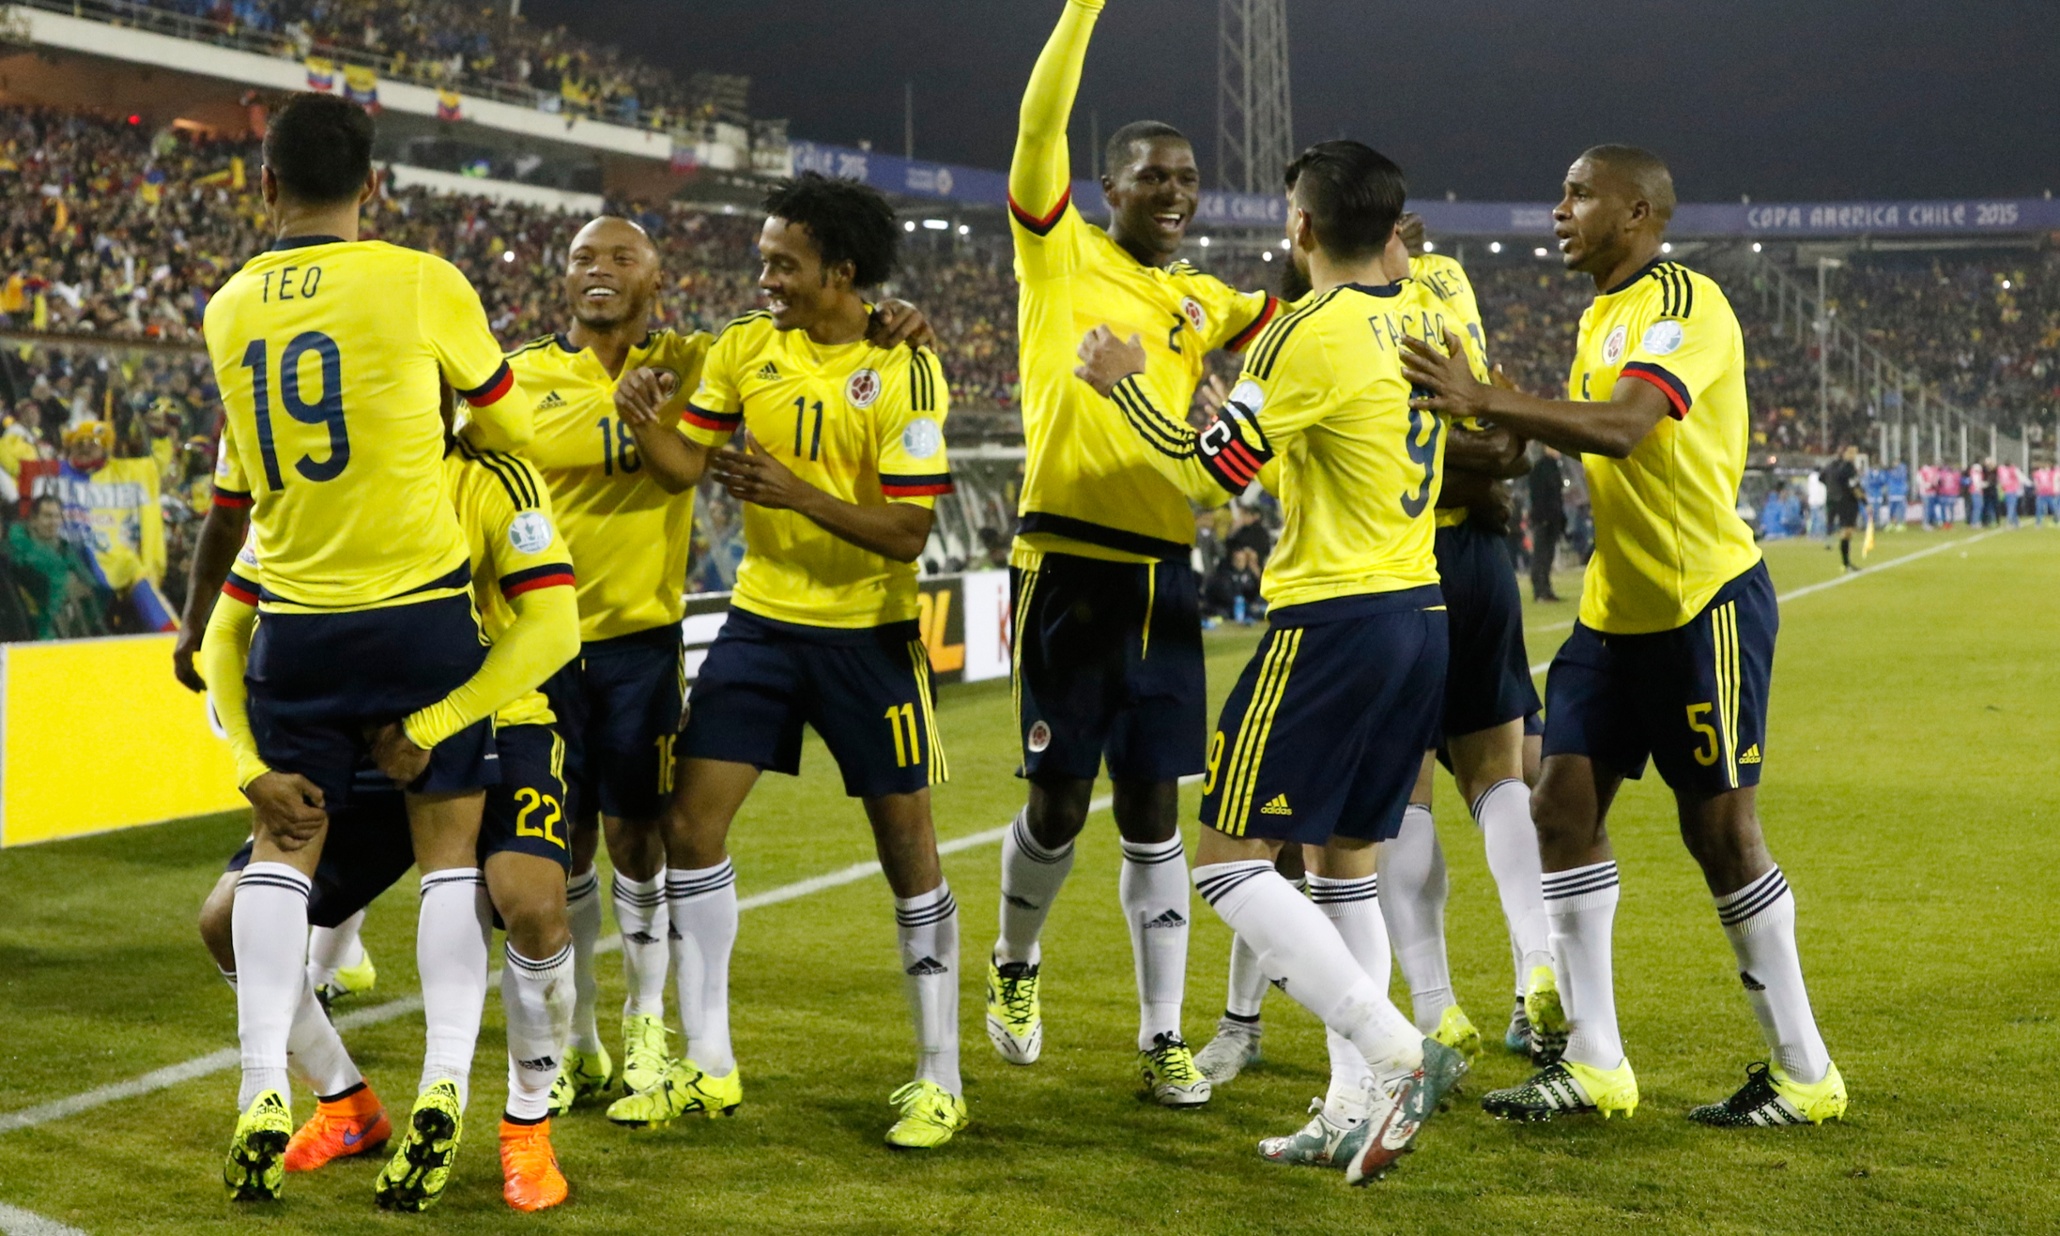   2015: Brazil 0 1 Colombia â€“ as it happened   Football   The Guardian  football brazil vs colombia live